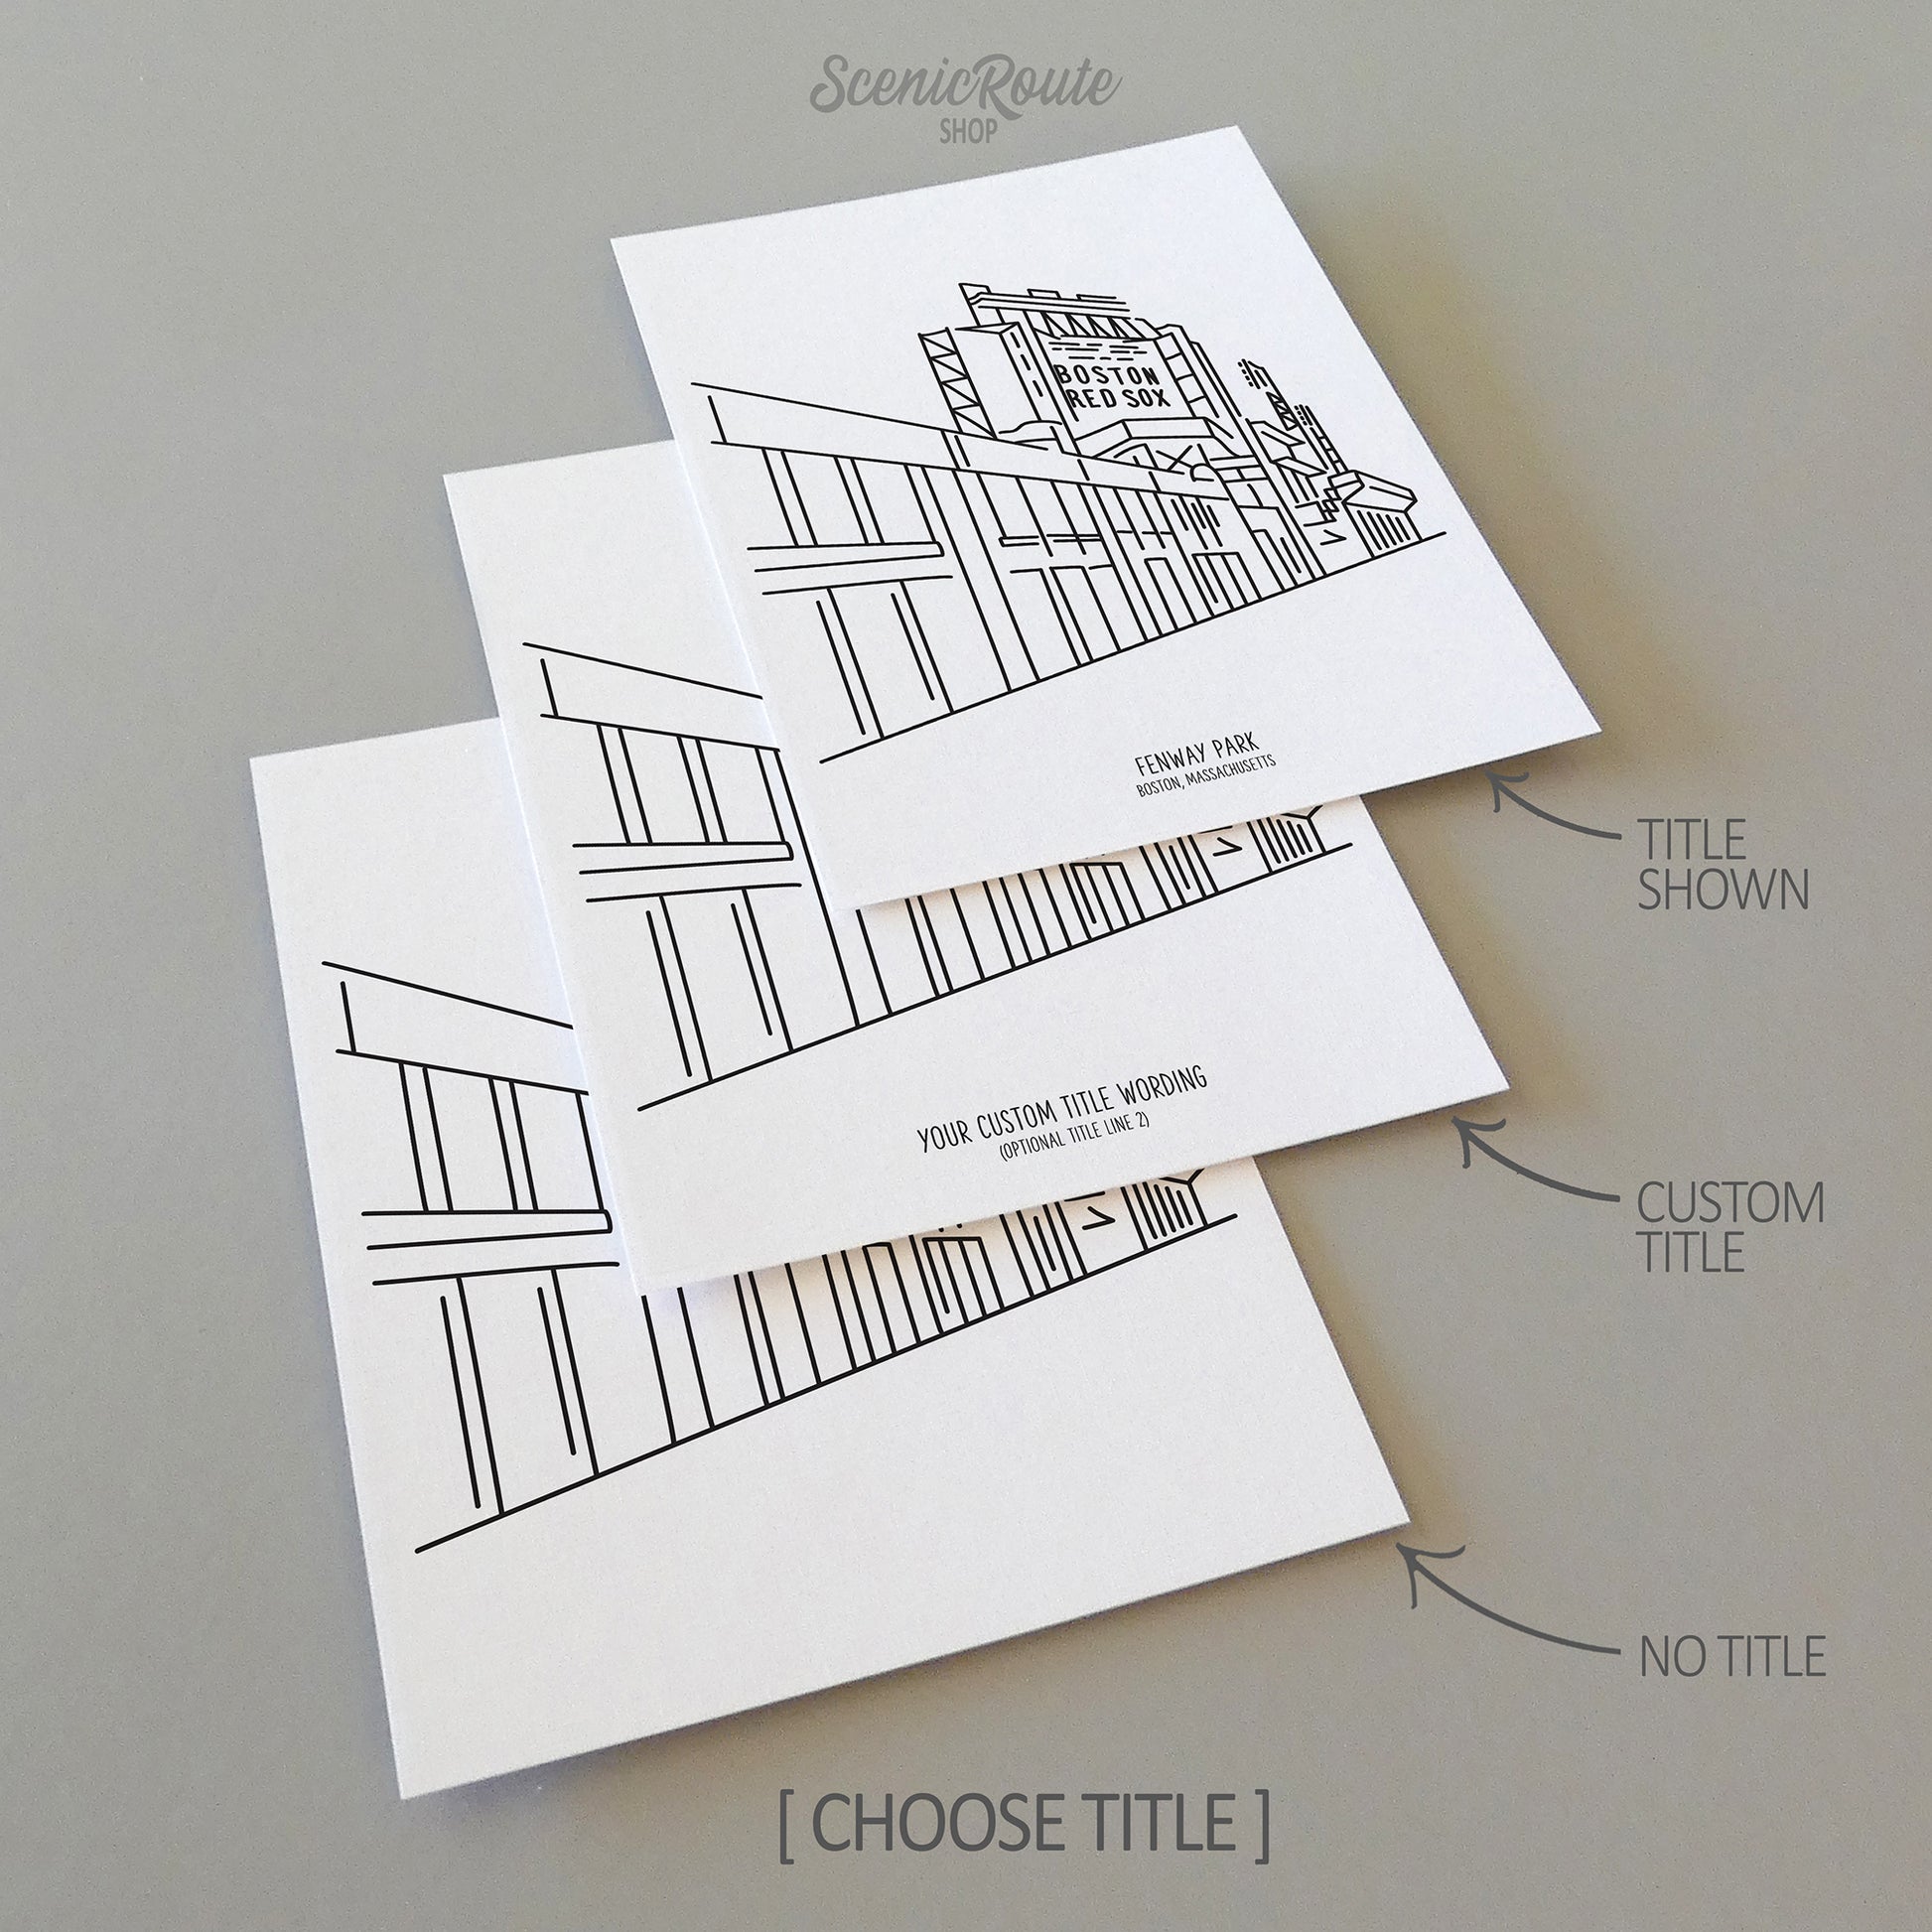 Three line art drawings of Boston Fenway Park on white linen paper with a gray background.  The pieces are shown with title options that can be chosen and personalized.